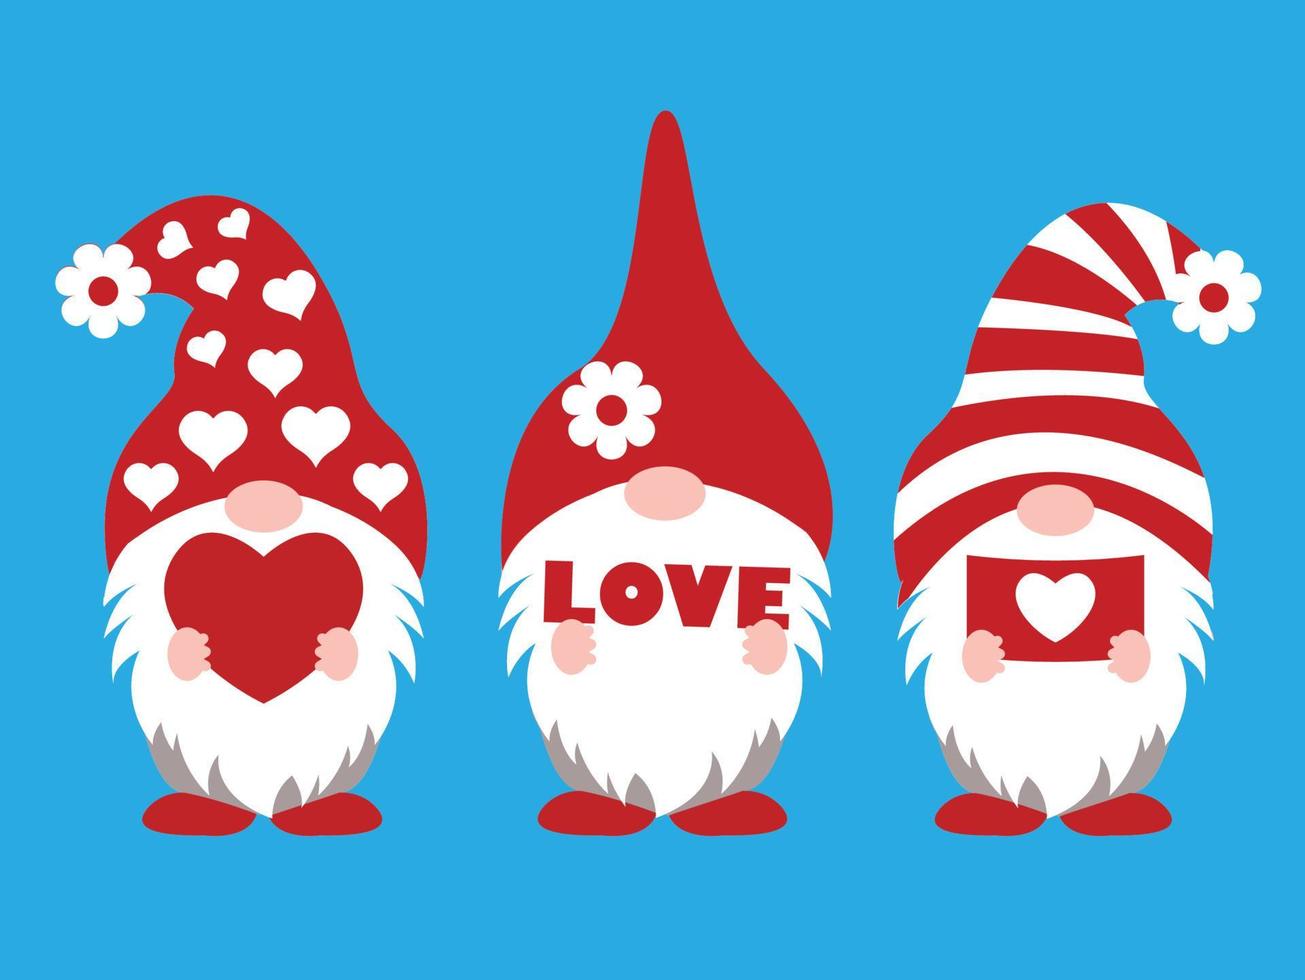 Three Valentine gnomes hold different things in their hands love letter, and heart. Vector illustration on blue background.